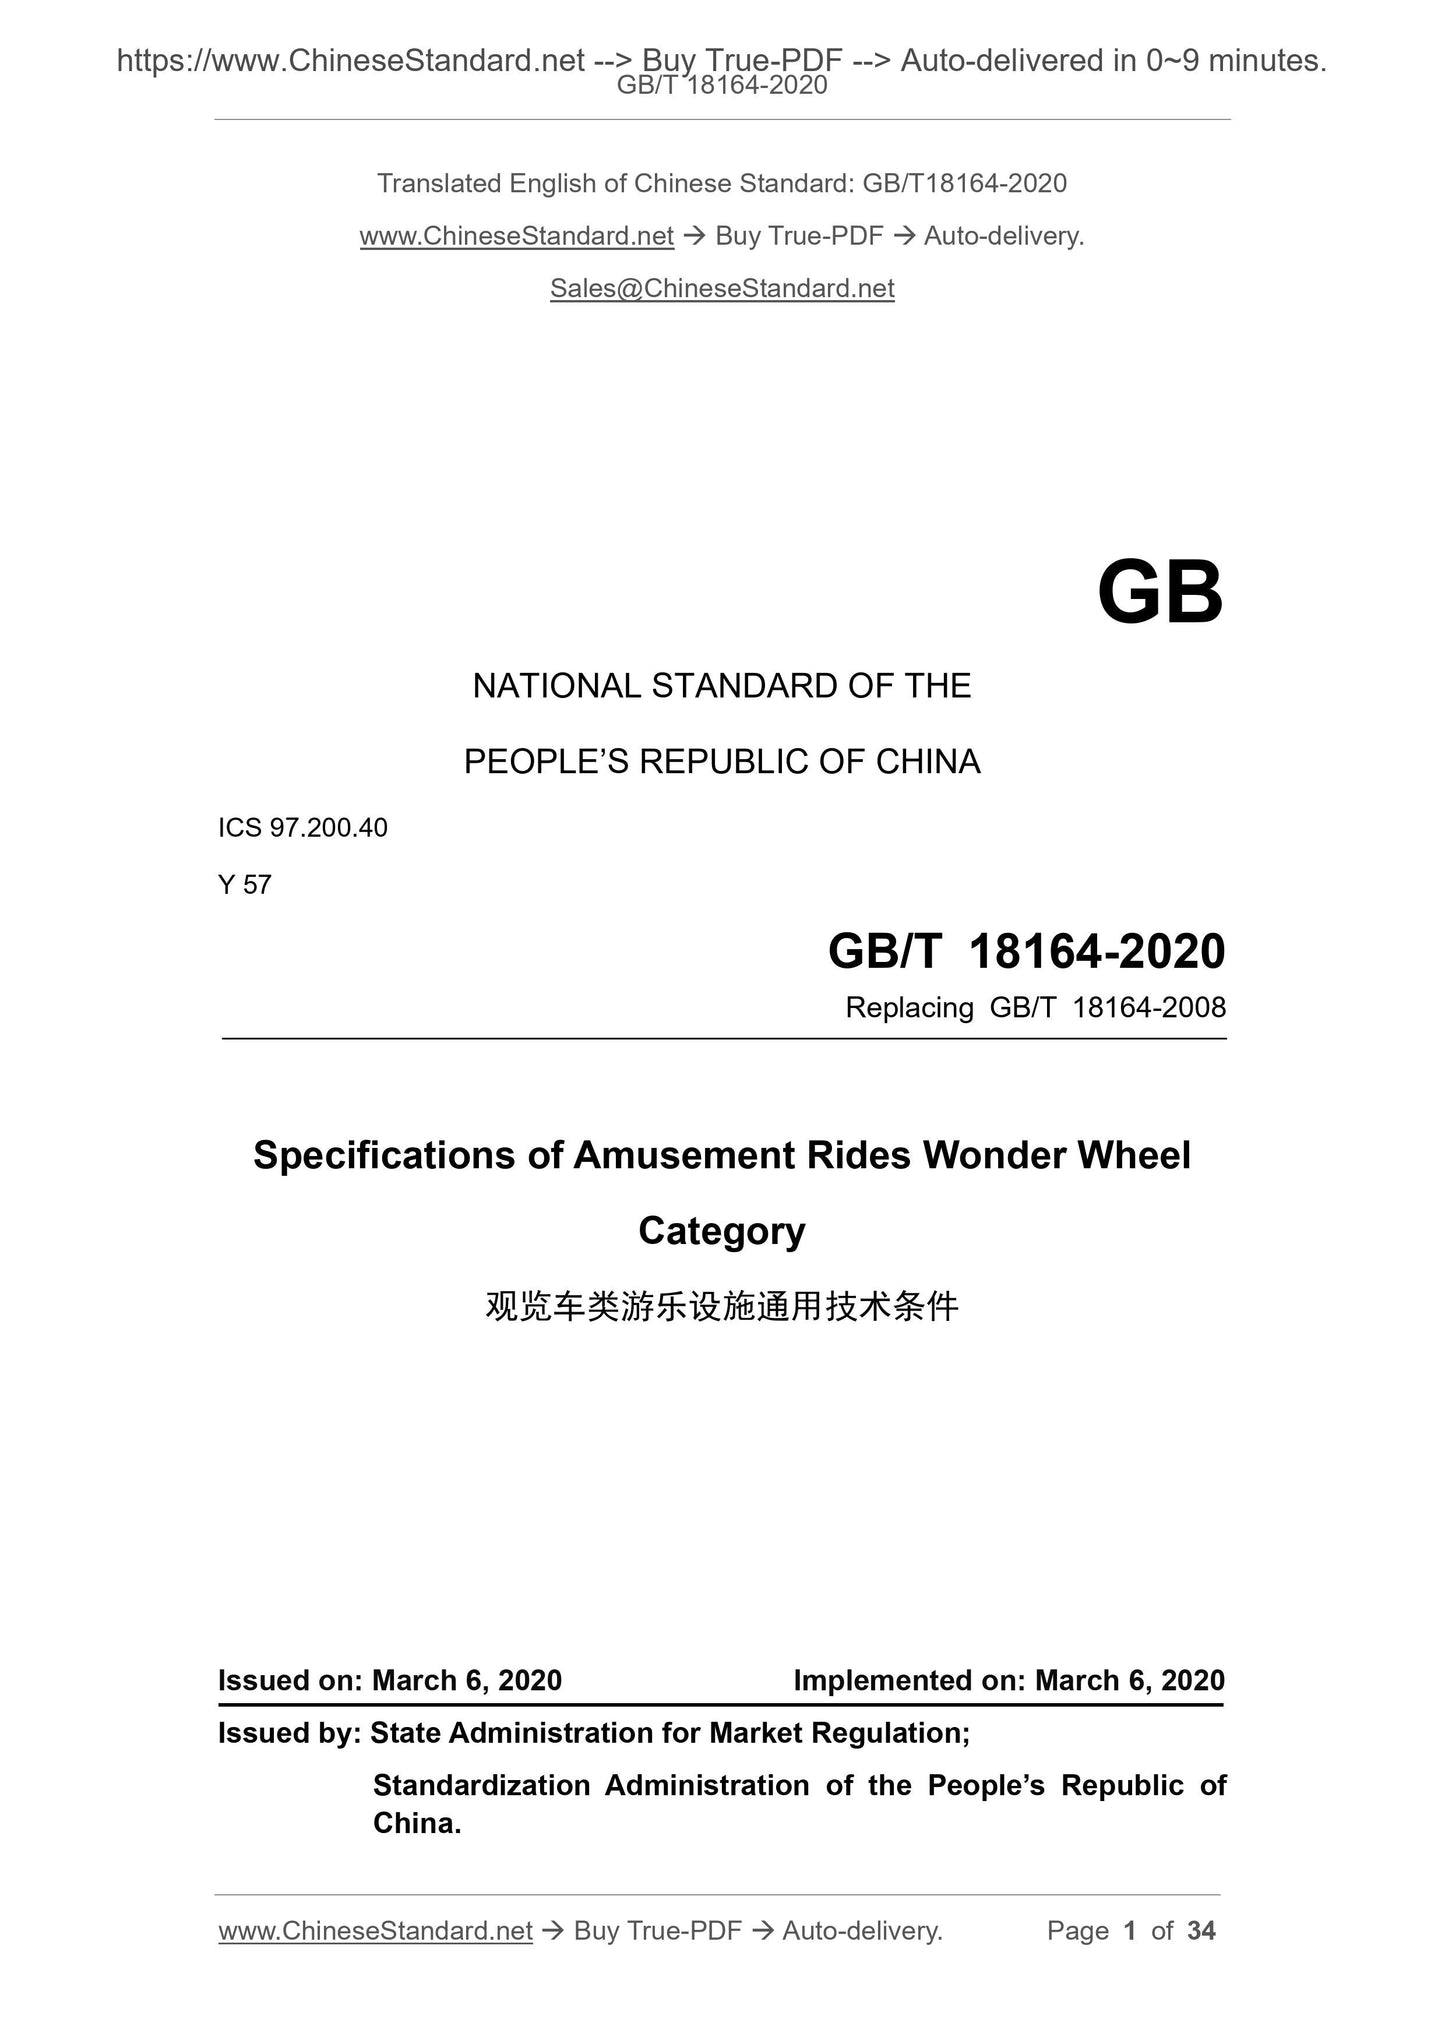 GB/T 18164-2020 Page 1